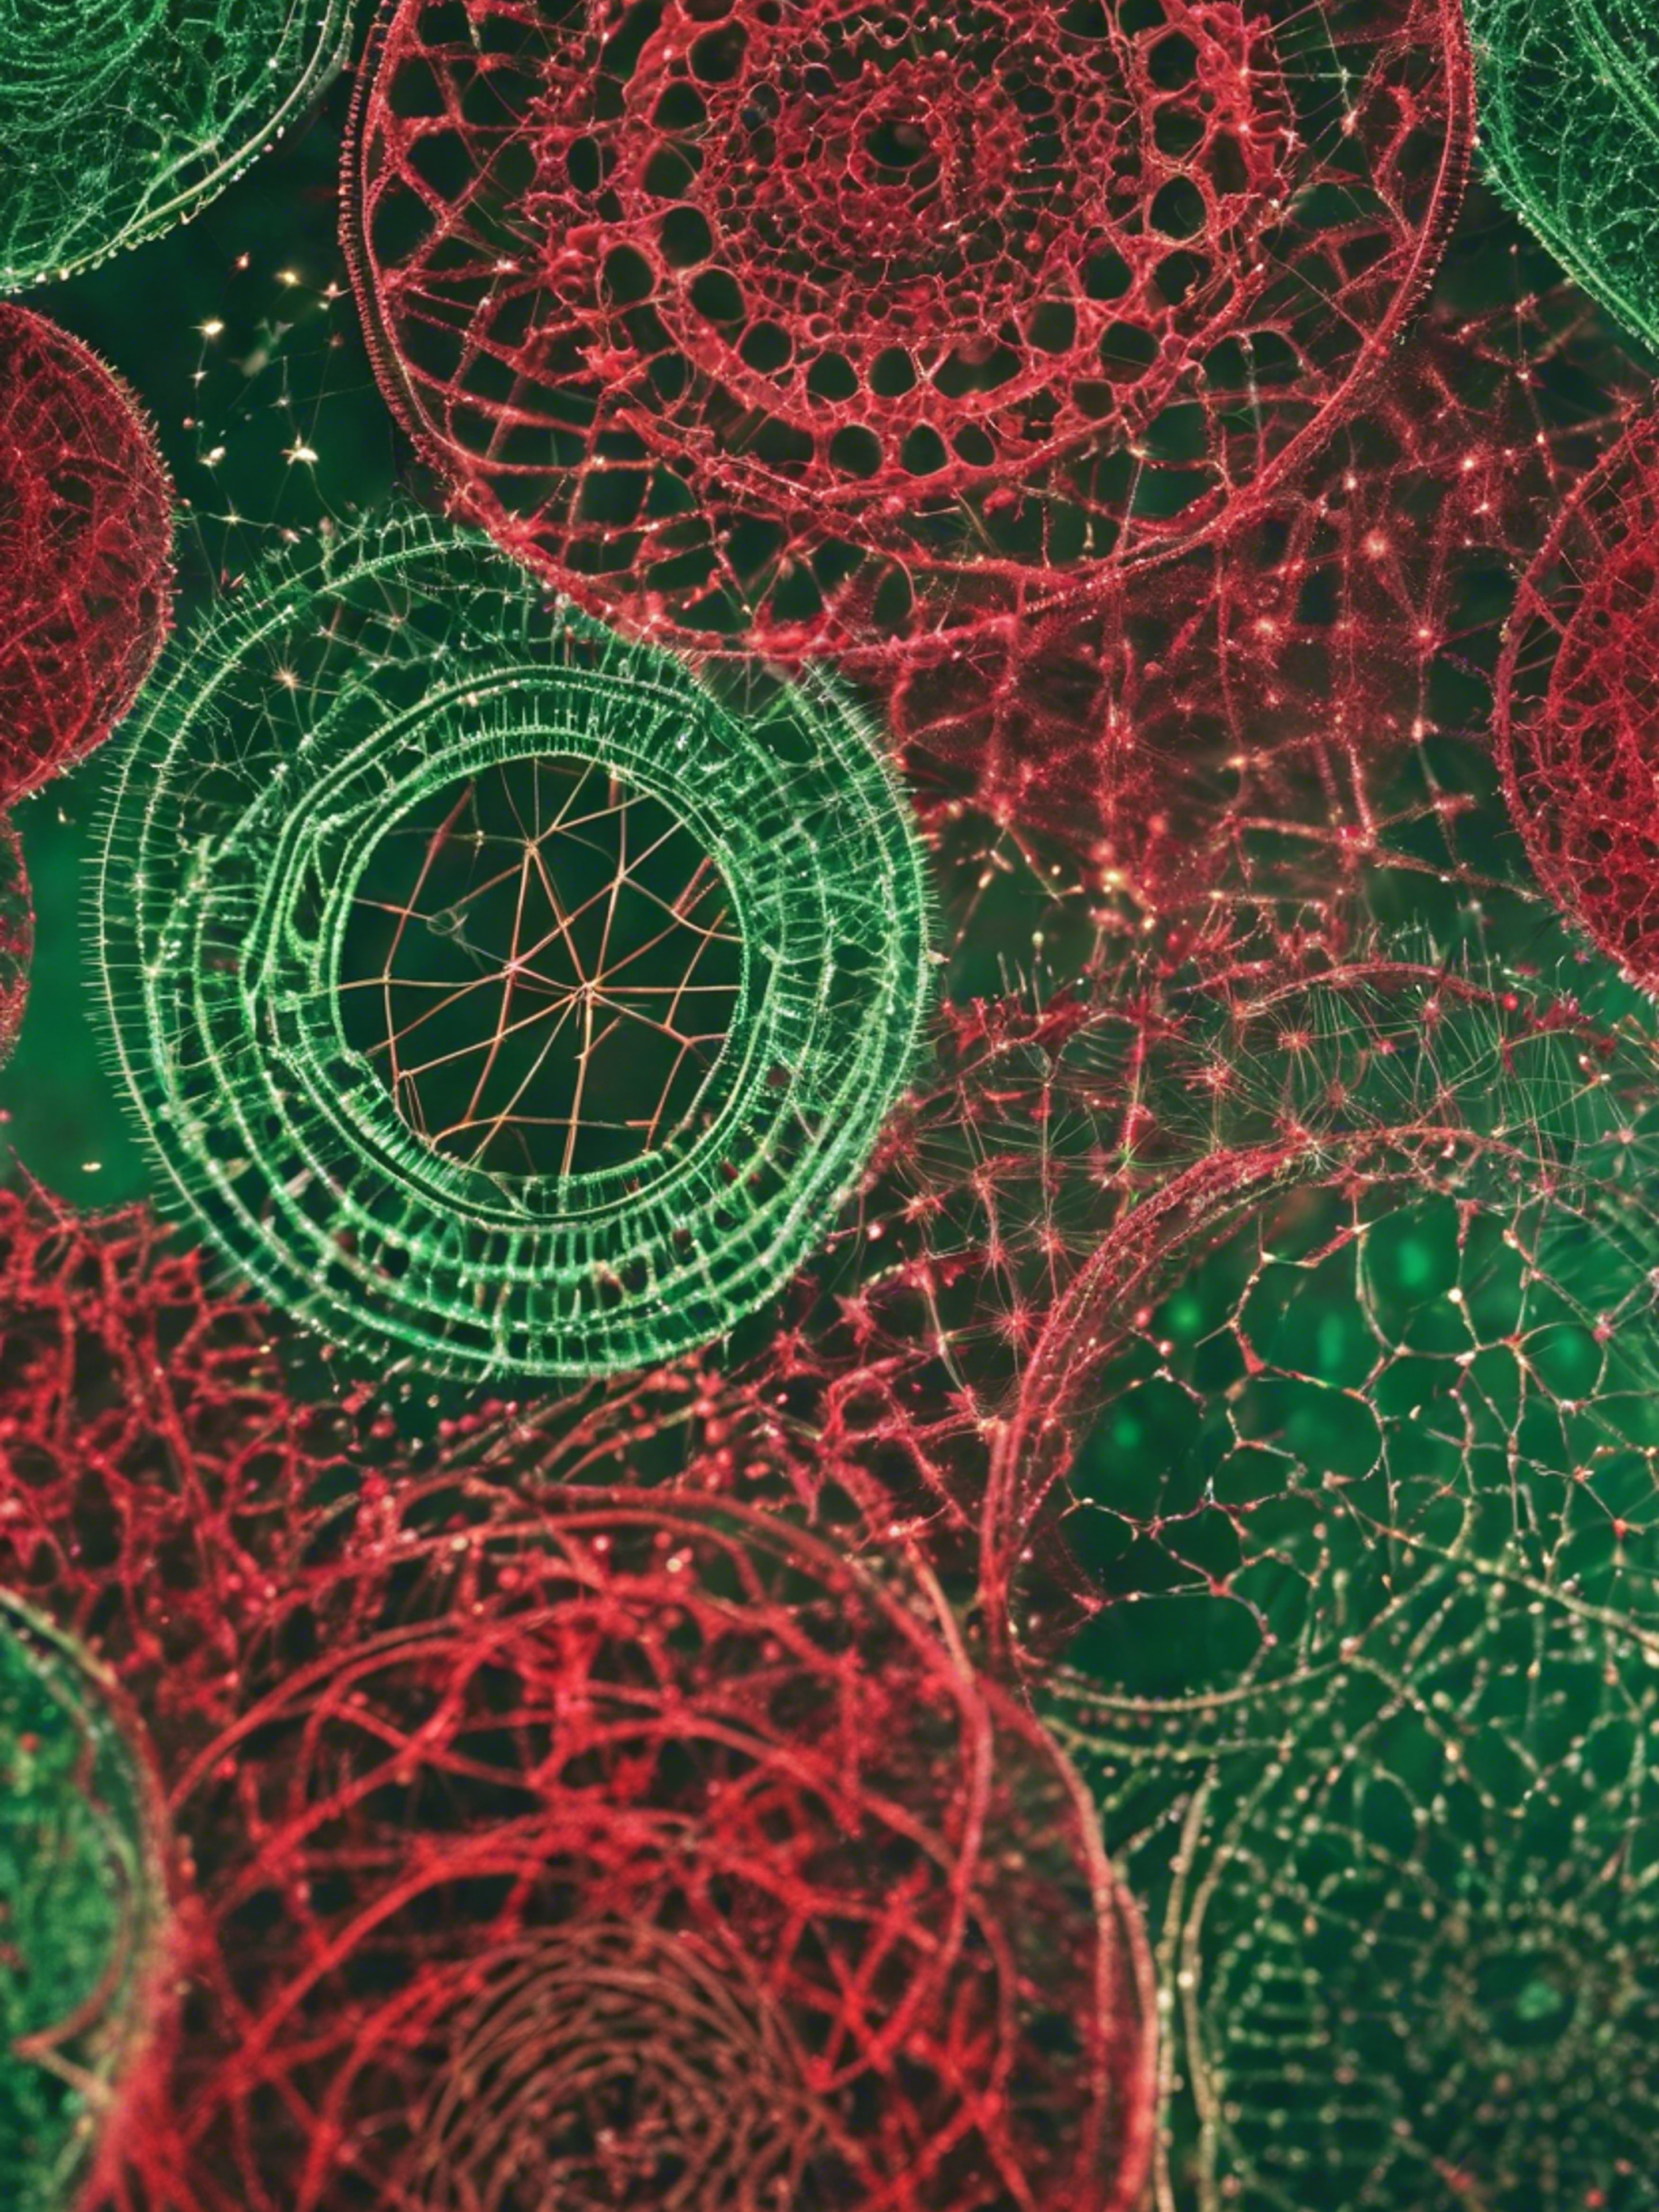 Red and green glitter forming a spirograph pattern Sfondo[8dd03403d83d45f69b51]